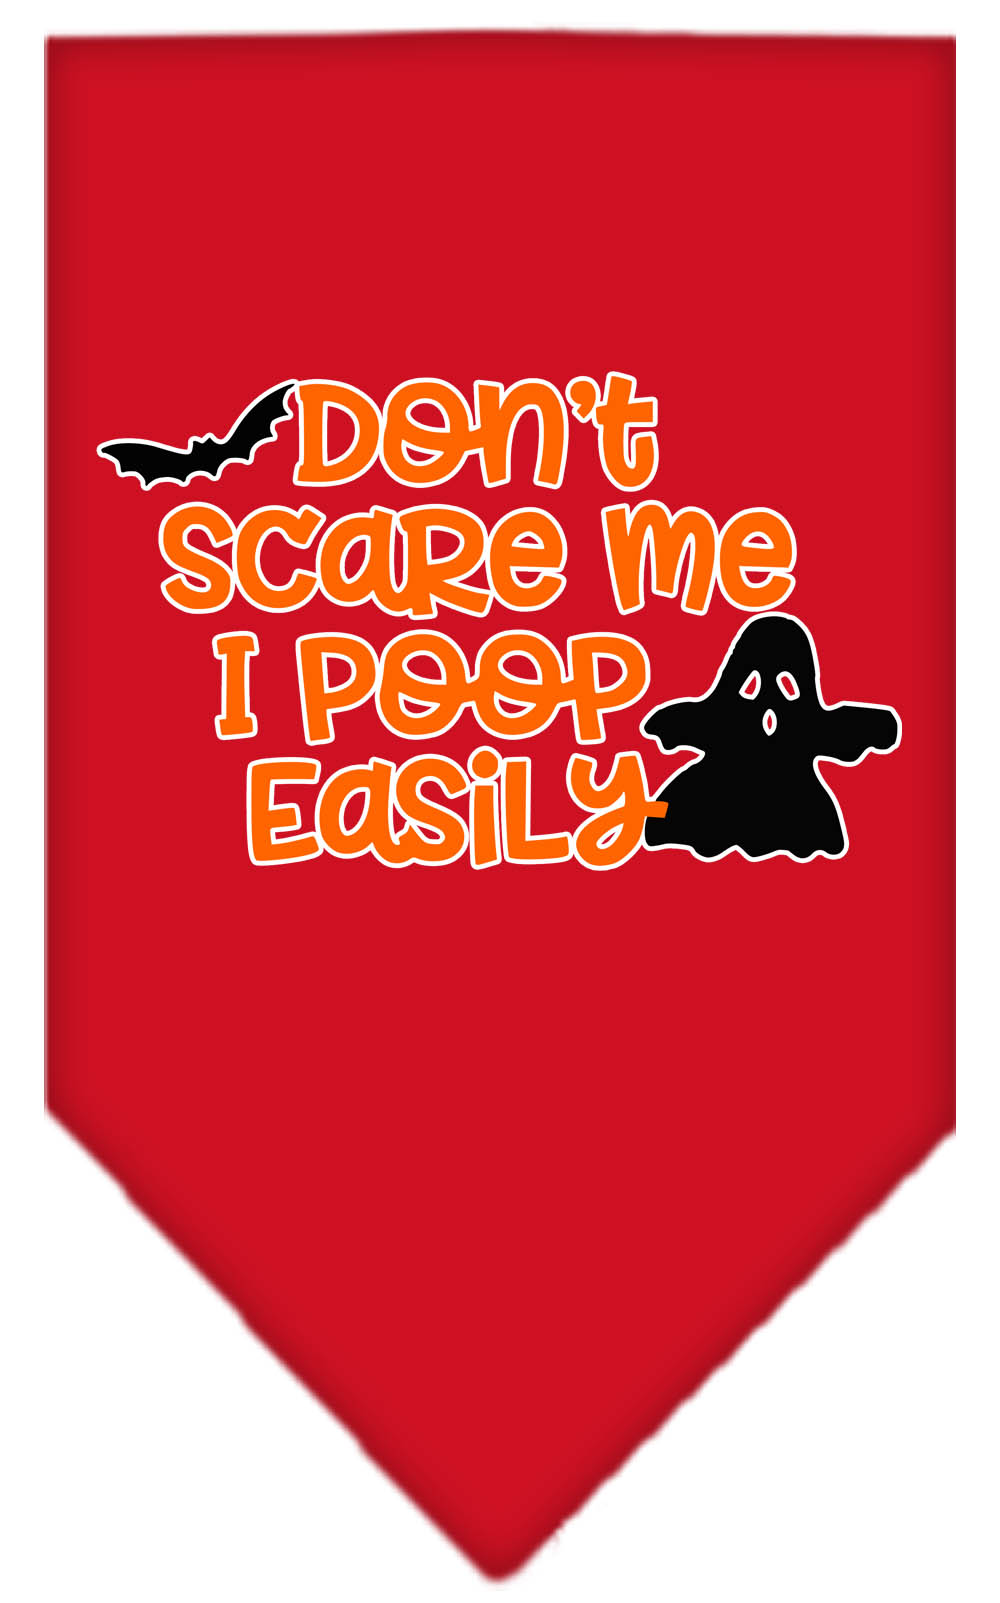 Don't Scare Me, Poops Easily Screen Print Bandana Red Small